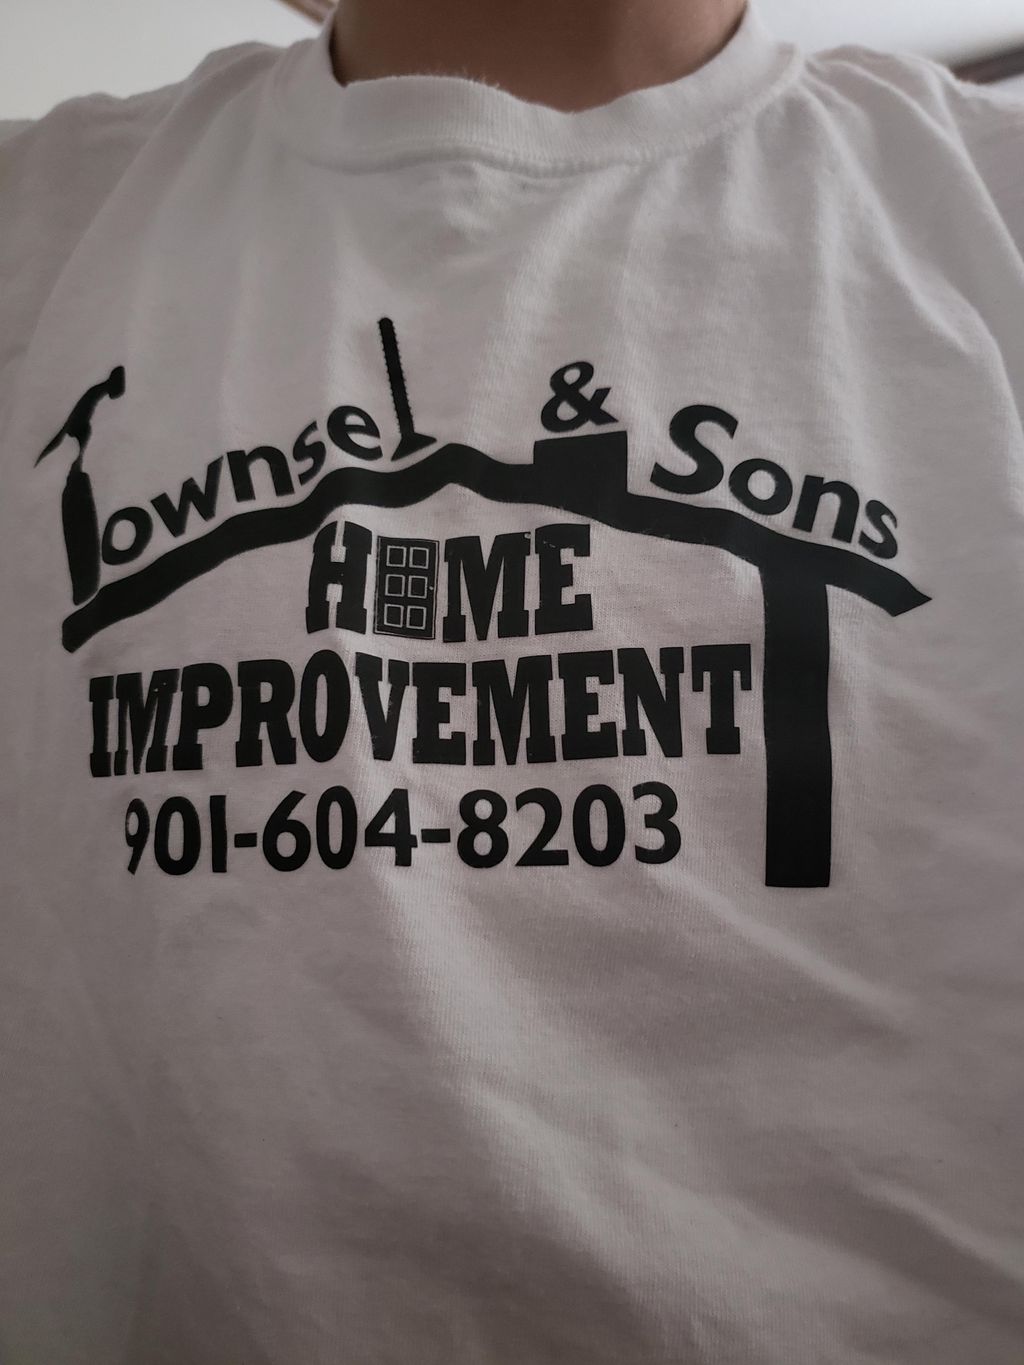 Townsel and sons home improvement